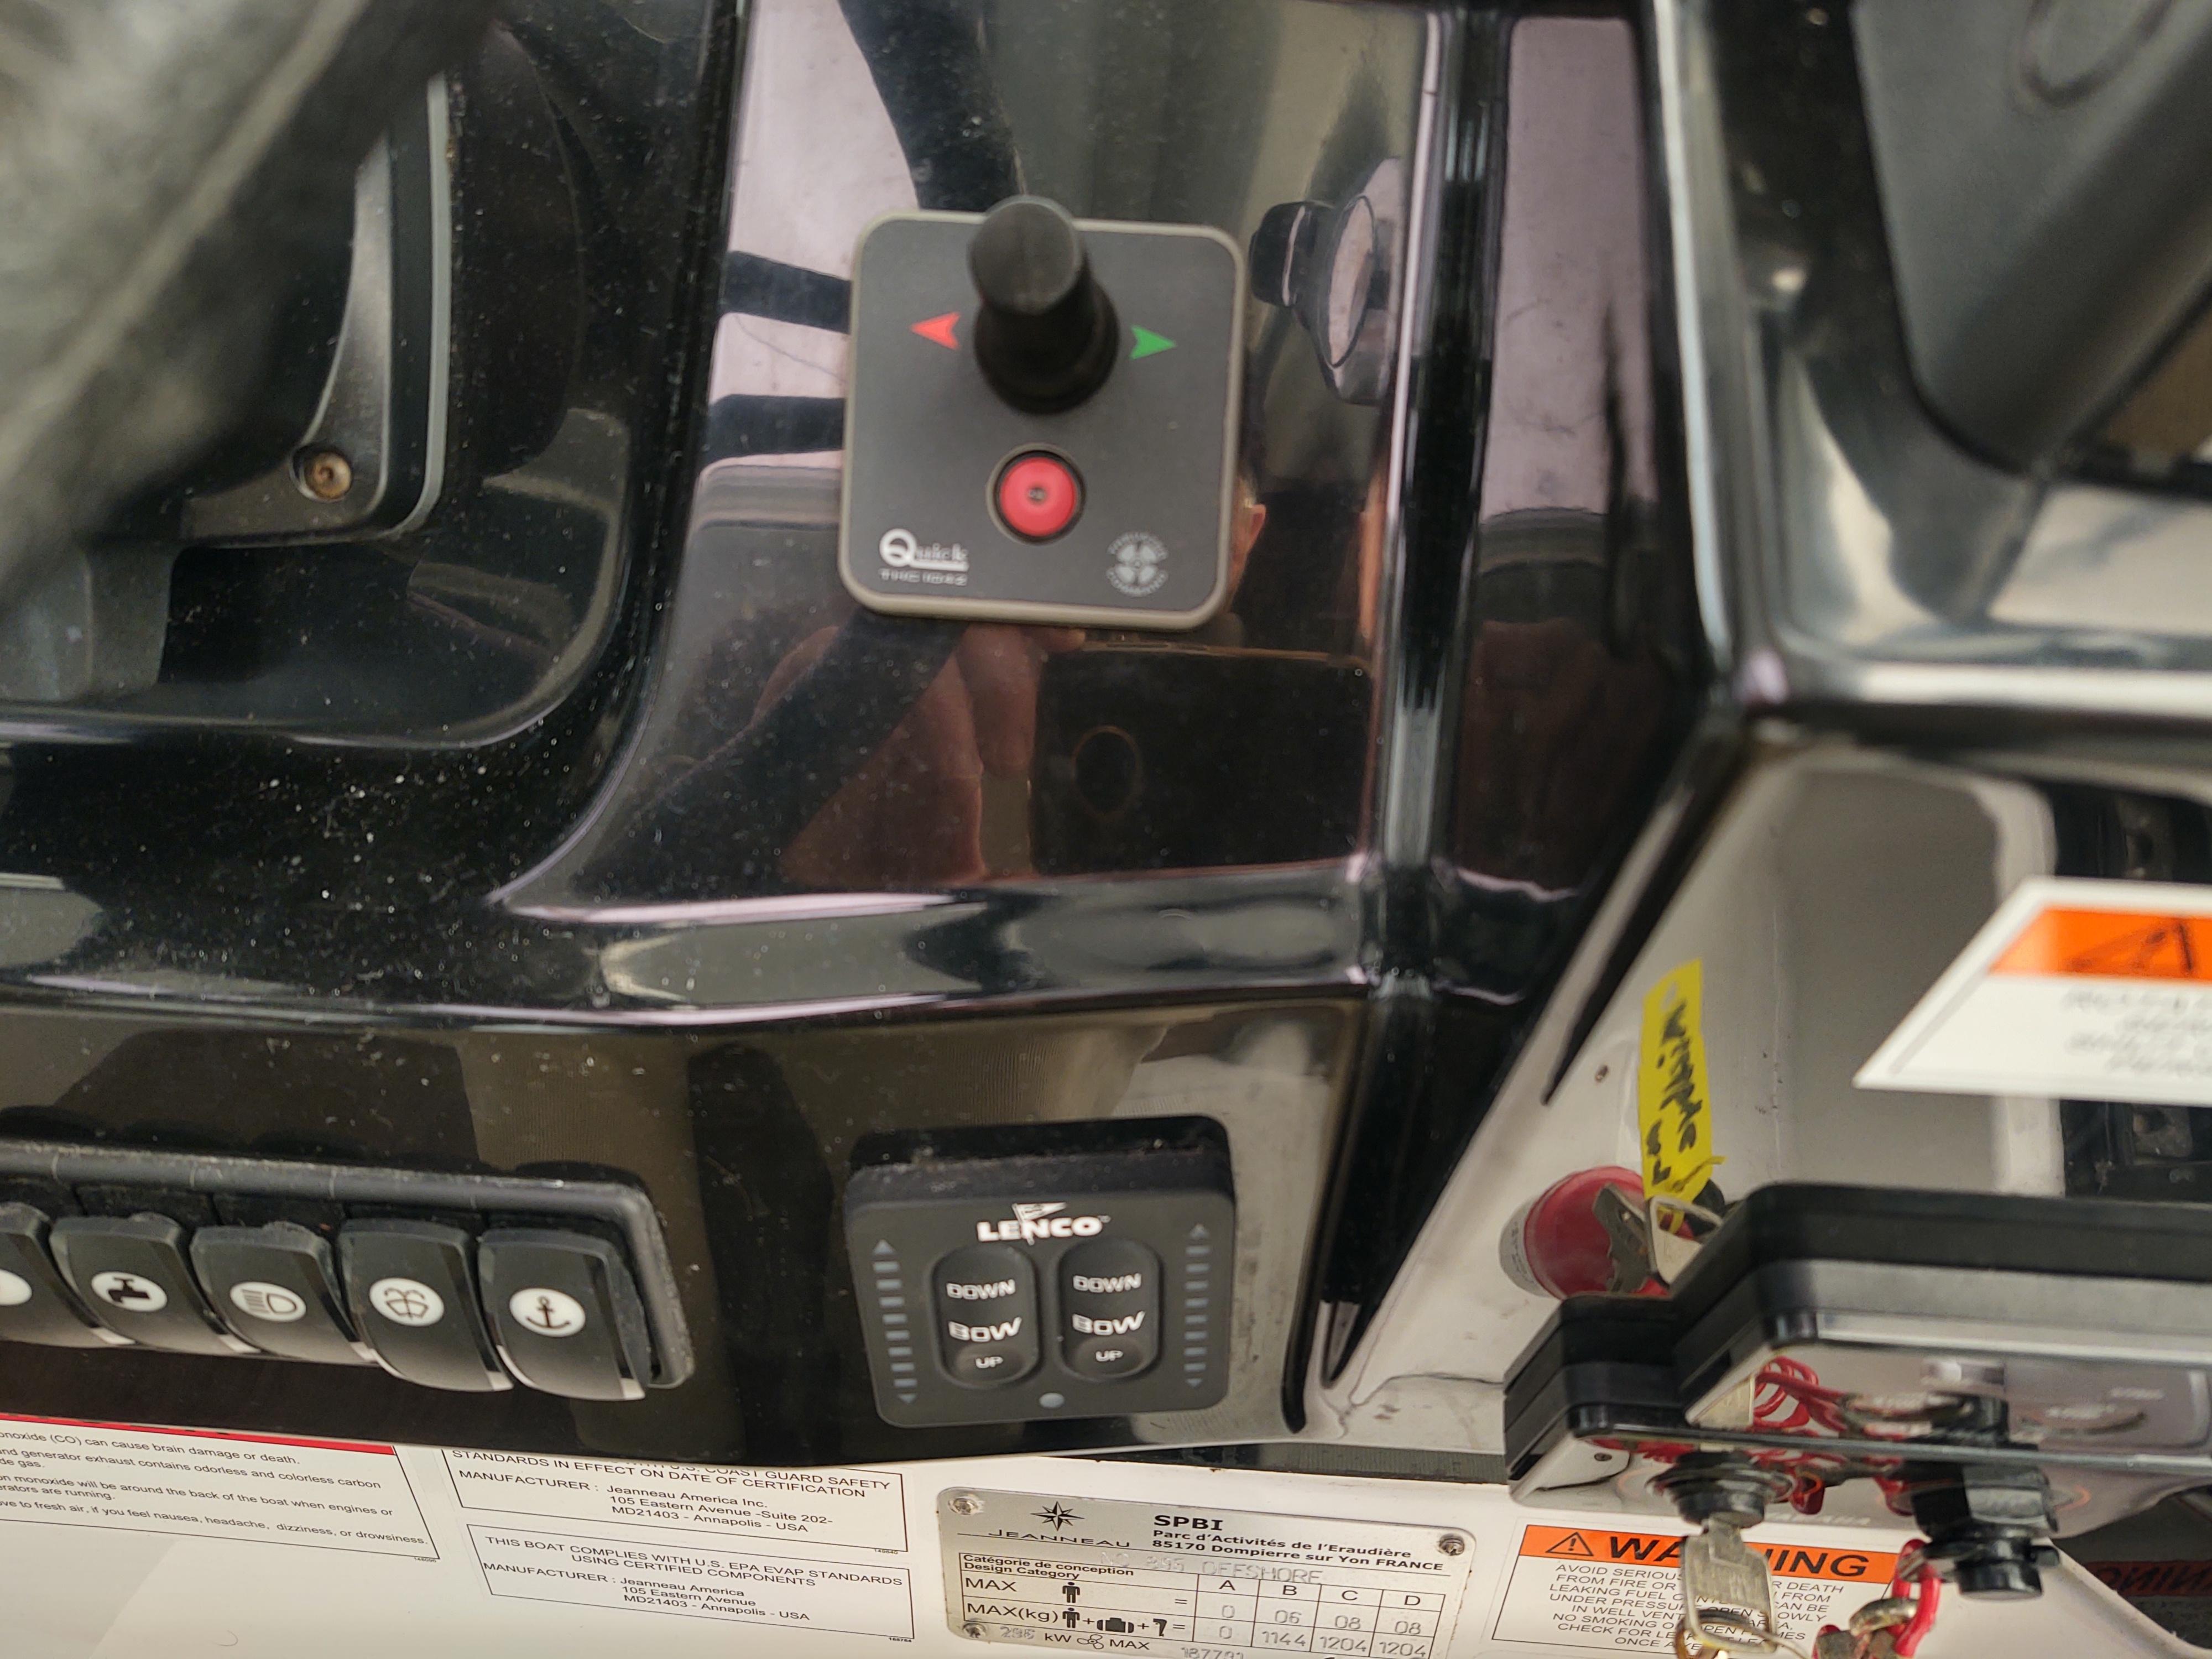 Knot Shore Bow Thruser and trim tab controls